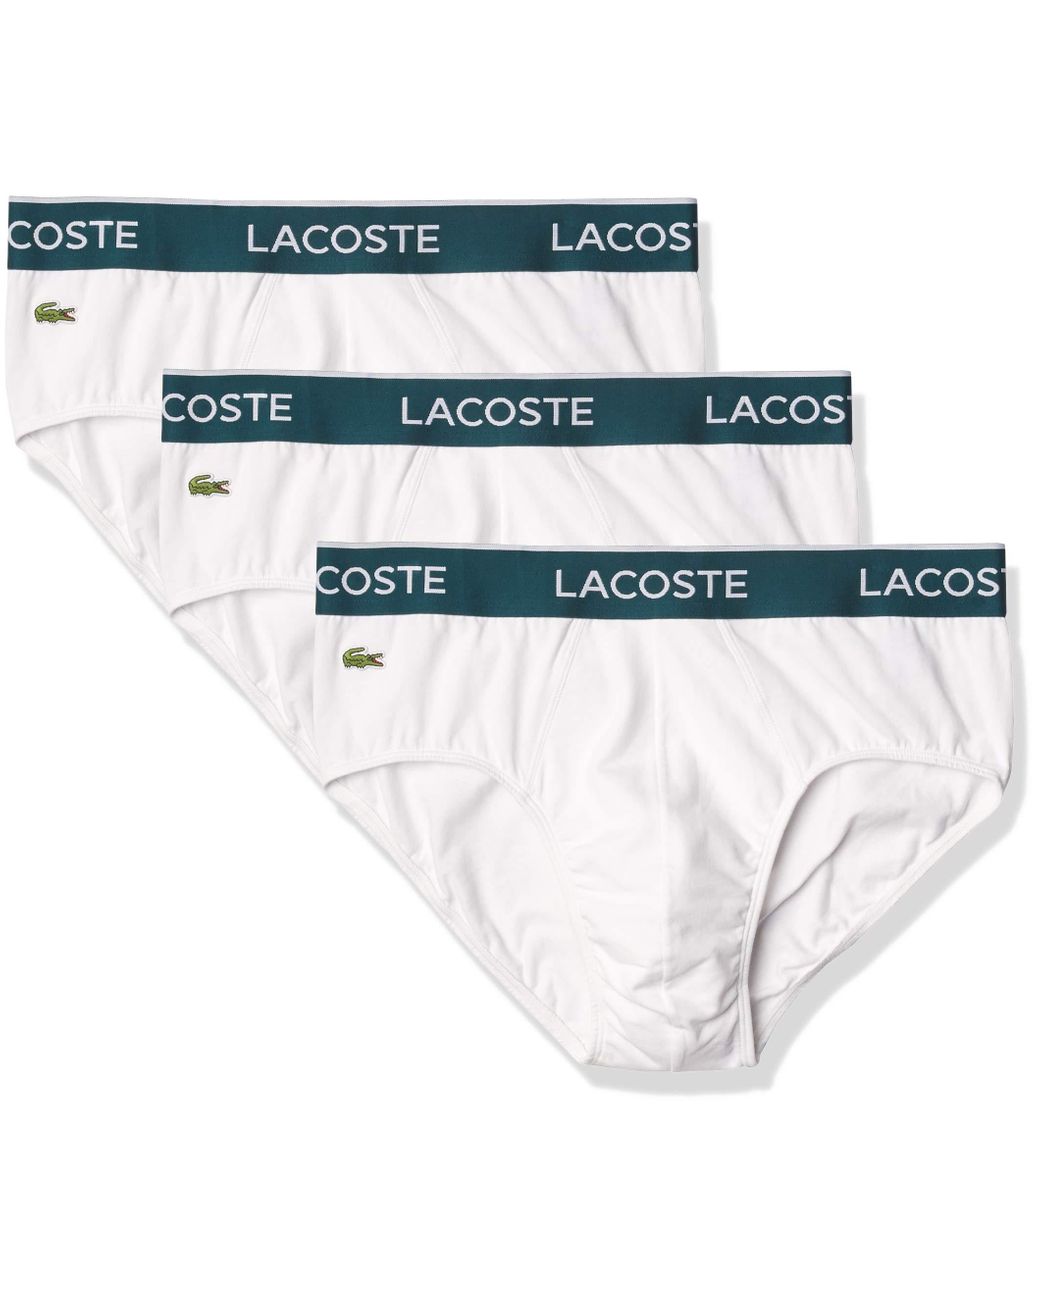 Lacoste Casual Classic 3 Pack Cotton Stretch Briefs in White for Men - Lyst